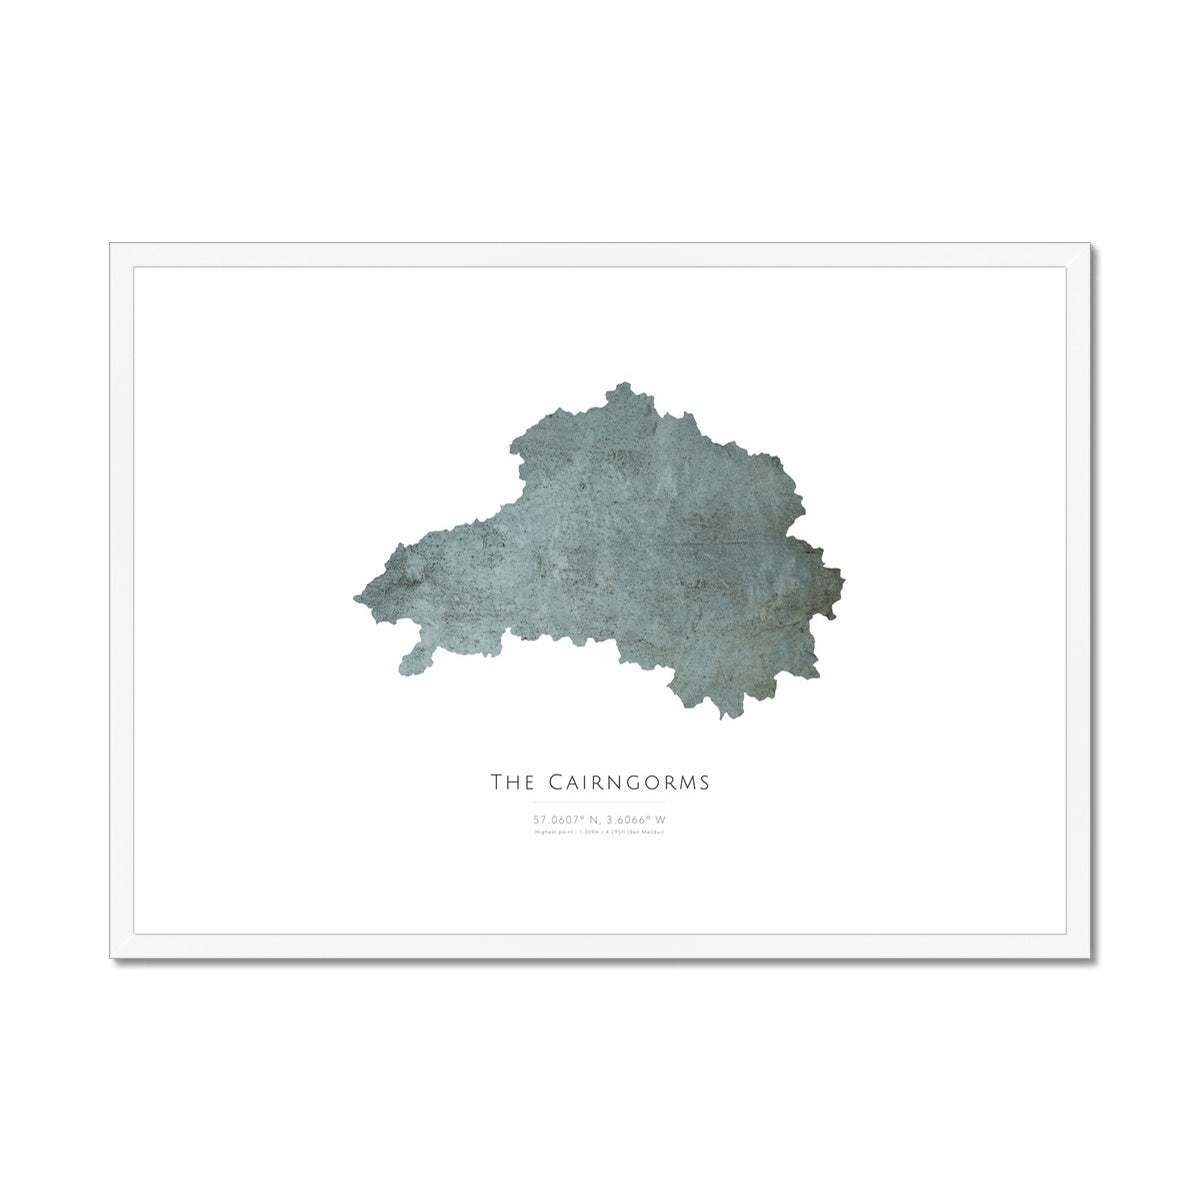 The Cairngorms -  Framed & Mounted Map